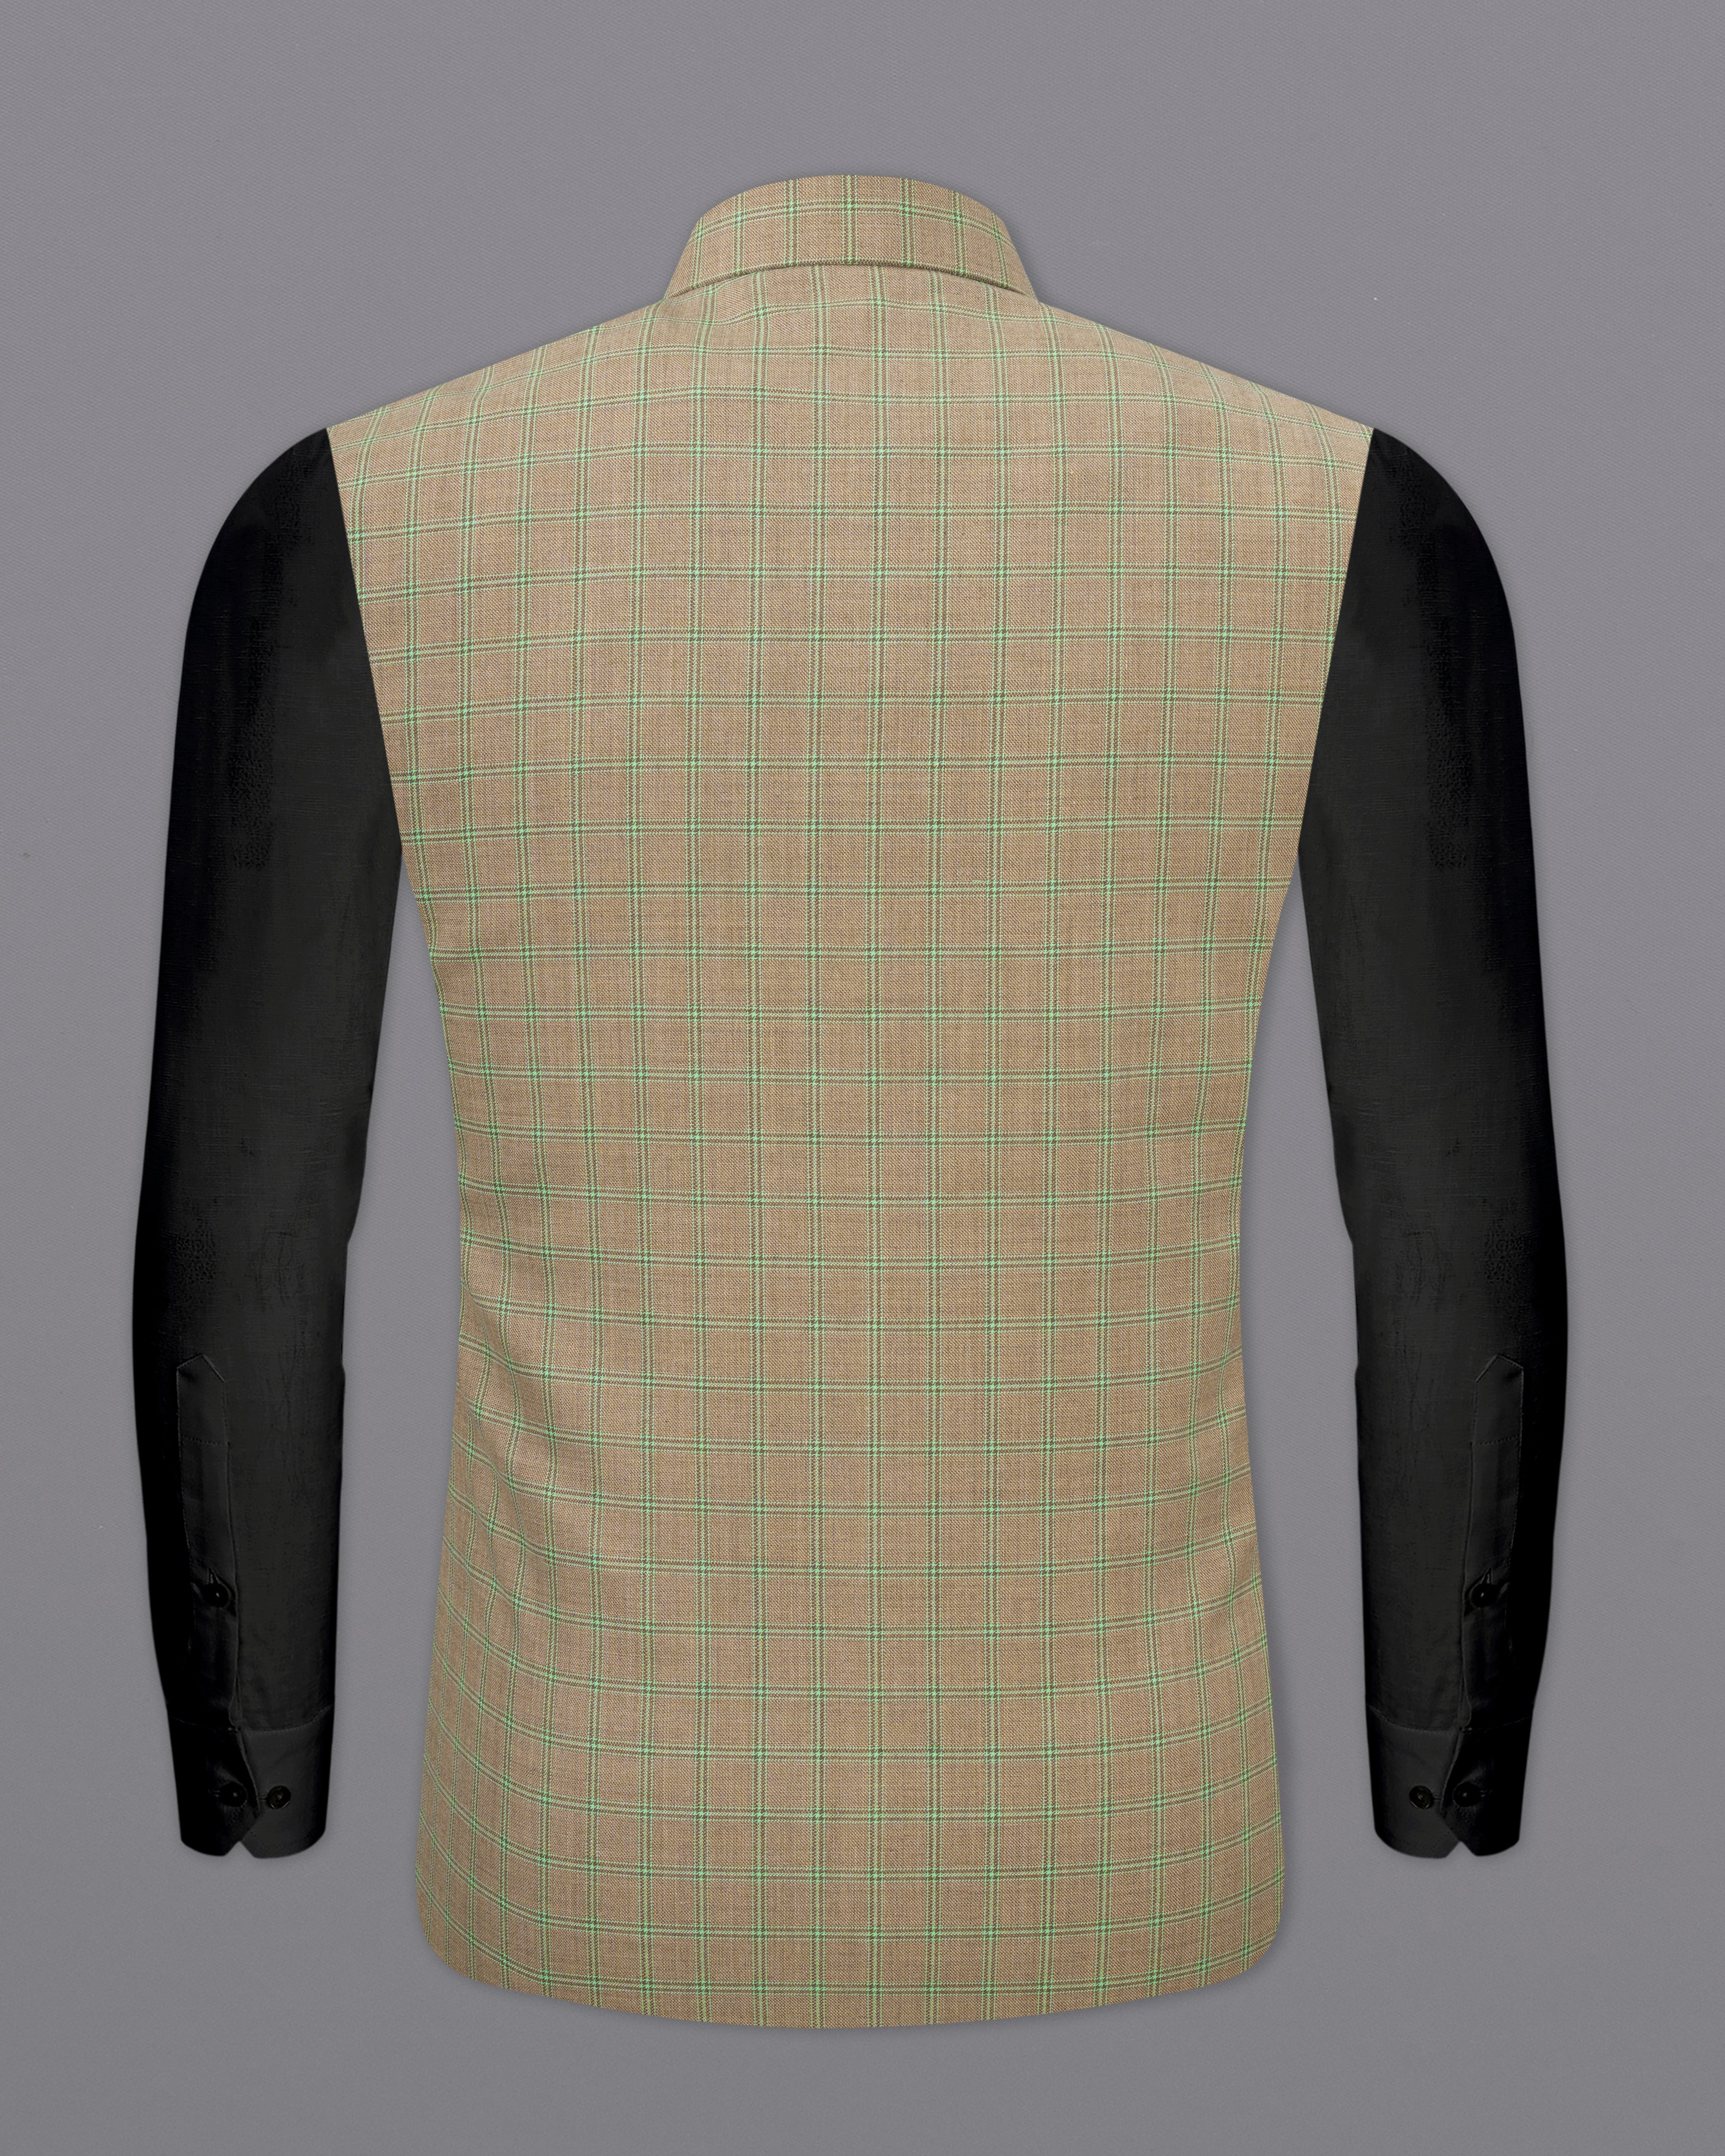 Sandrift Brown with Sprout Green Plaid Nehru Jacket WC2483-38, WC2483-39, WC2483-40, WC2483-42, WC2483-44, WC2483-46, WC2483-48, WC2483-50, WC2483-52